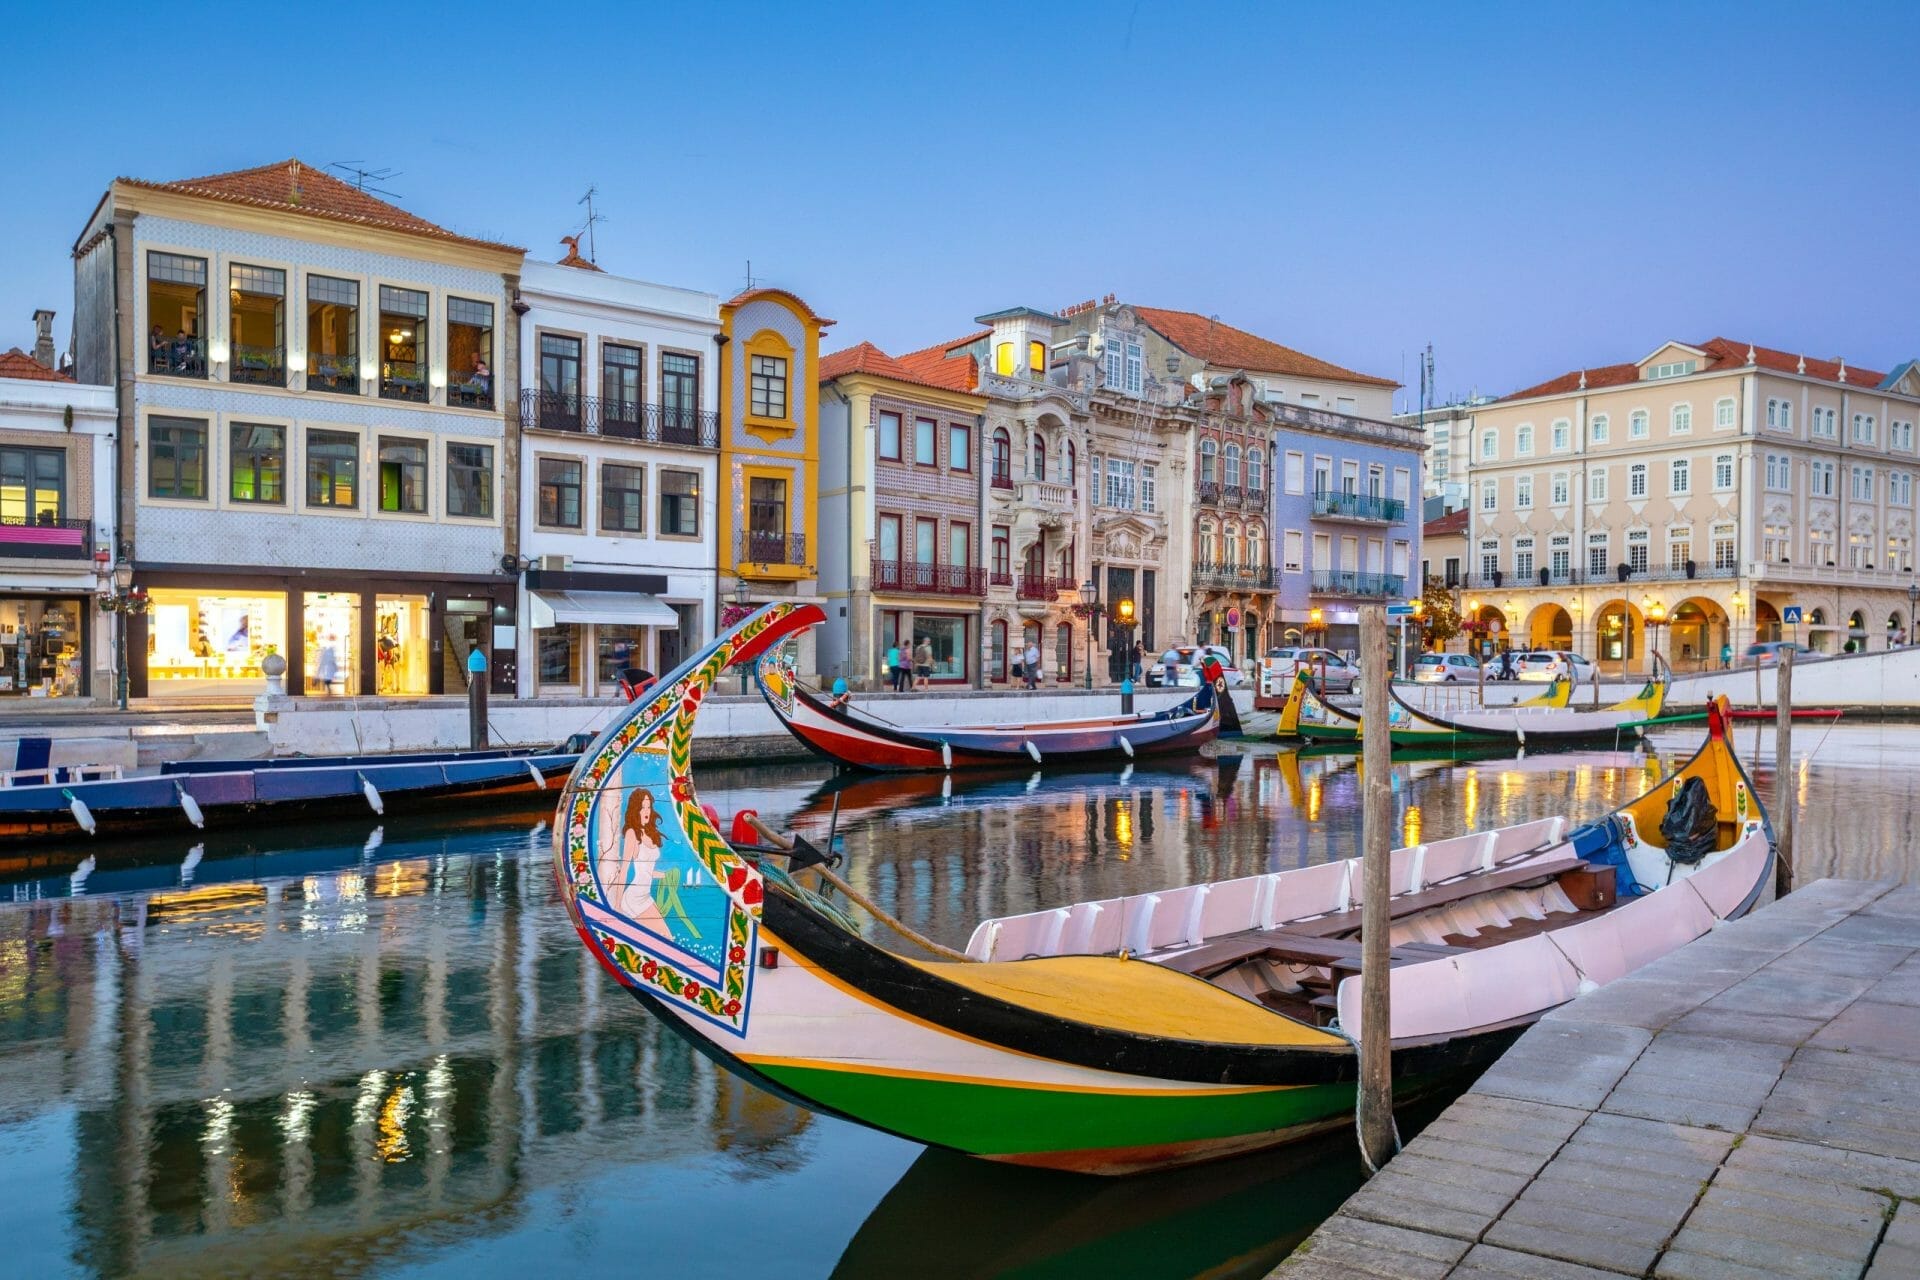 City Of Aveiro In The North Of Portugal With The Water Canals By Night.